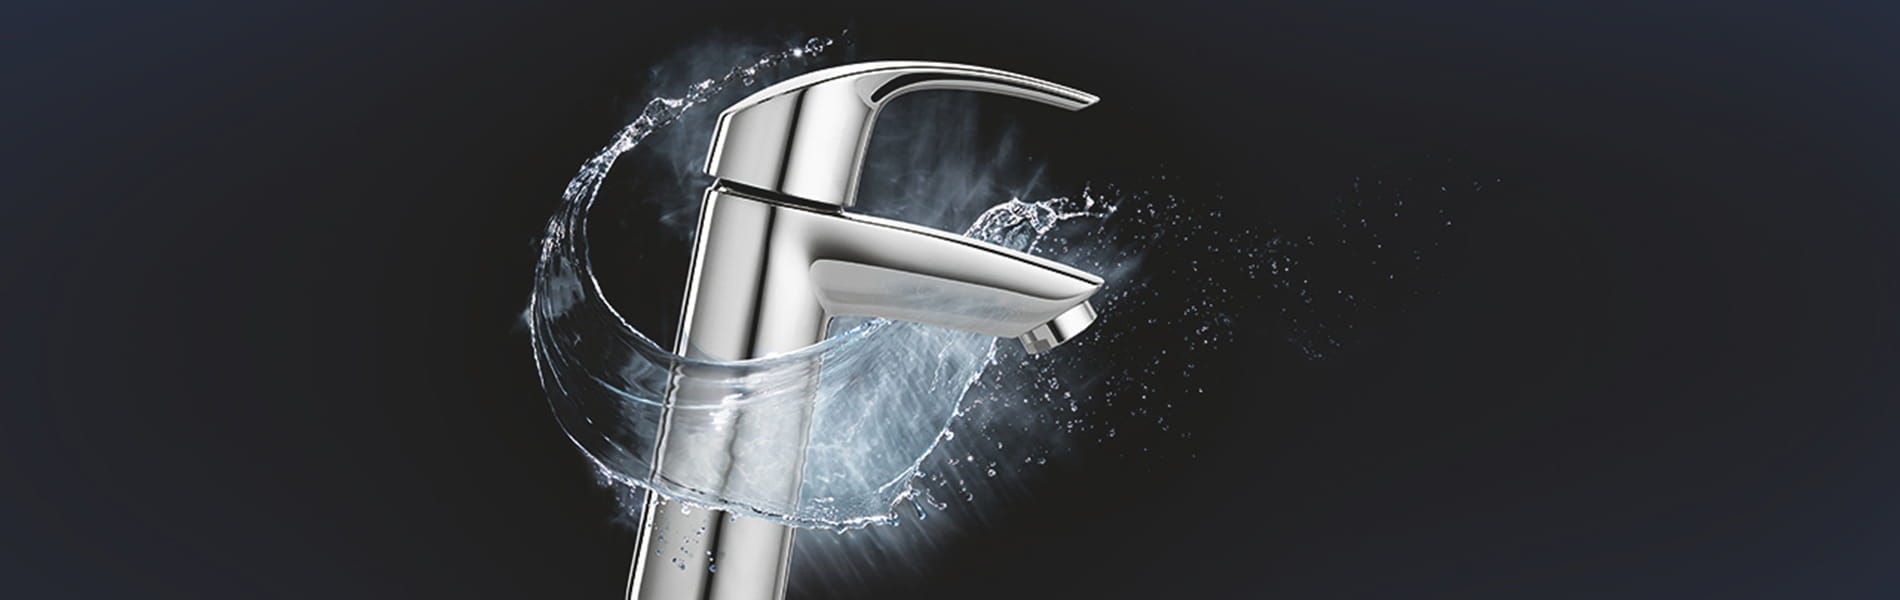 Eurosmart bathroom faucet with water circling around. 